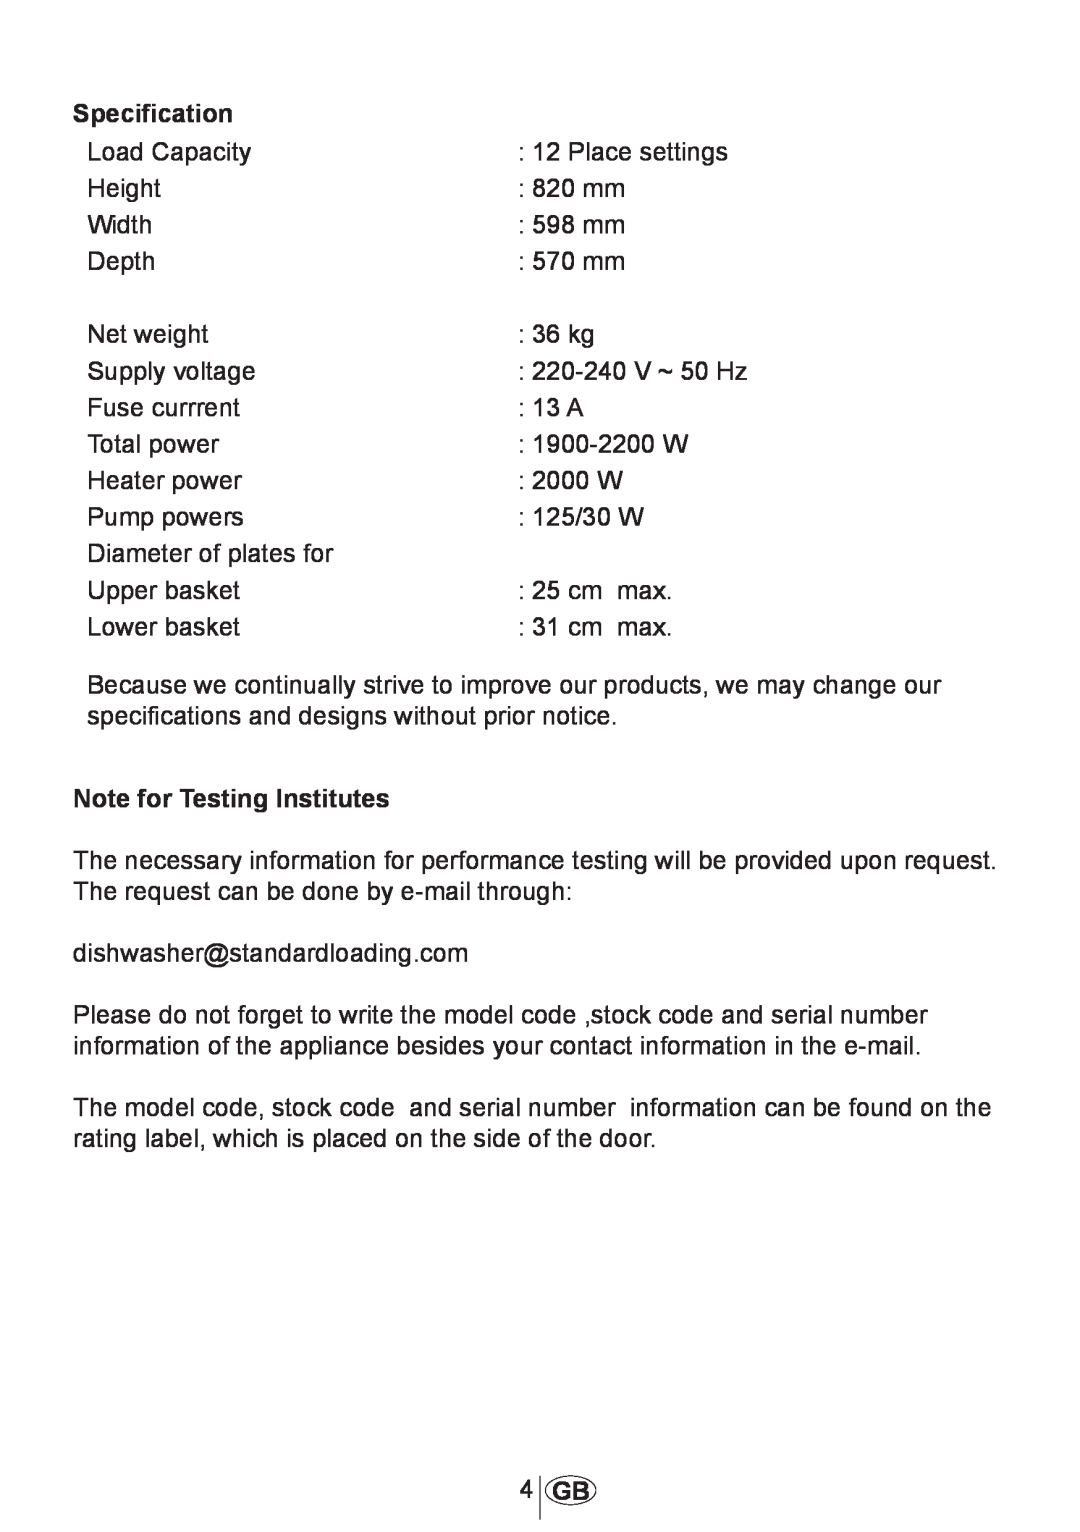 Beko DW602 manual Specification, Note for Testing Institutes 